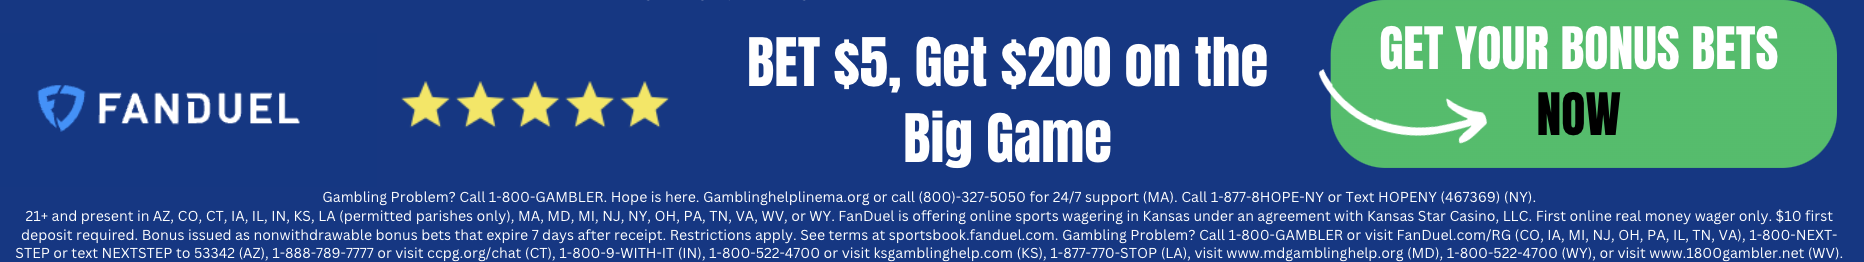 FanDuel CTA $5 to $200 on the big game